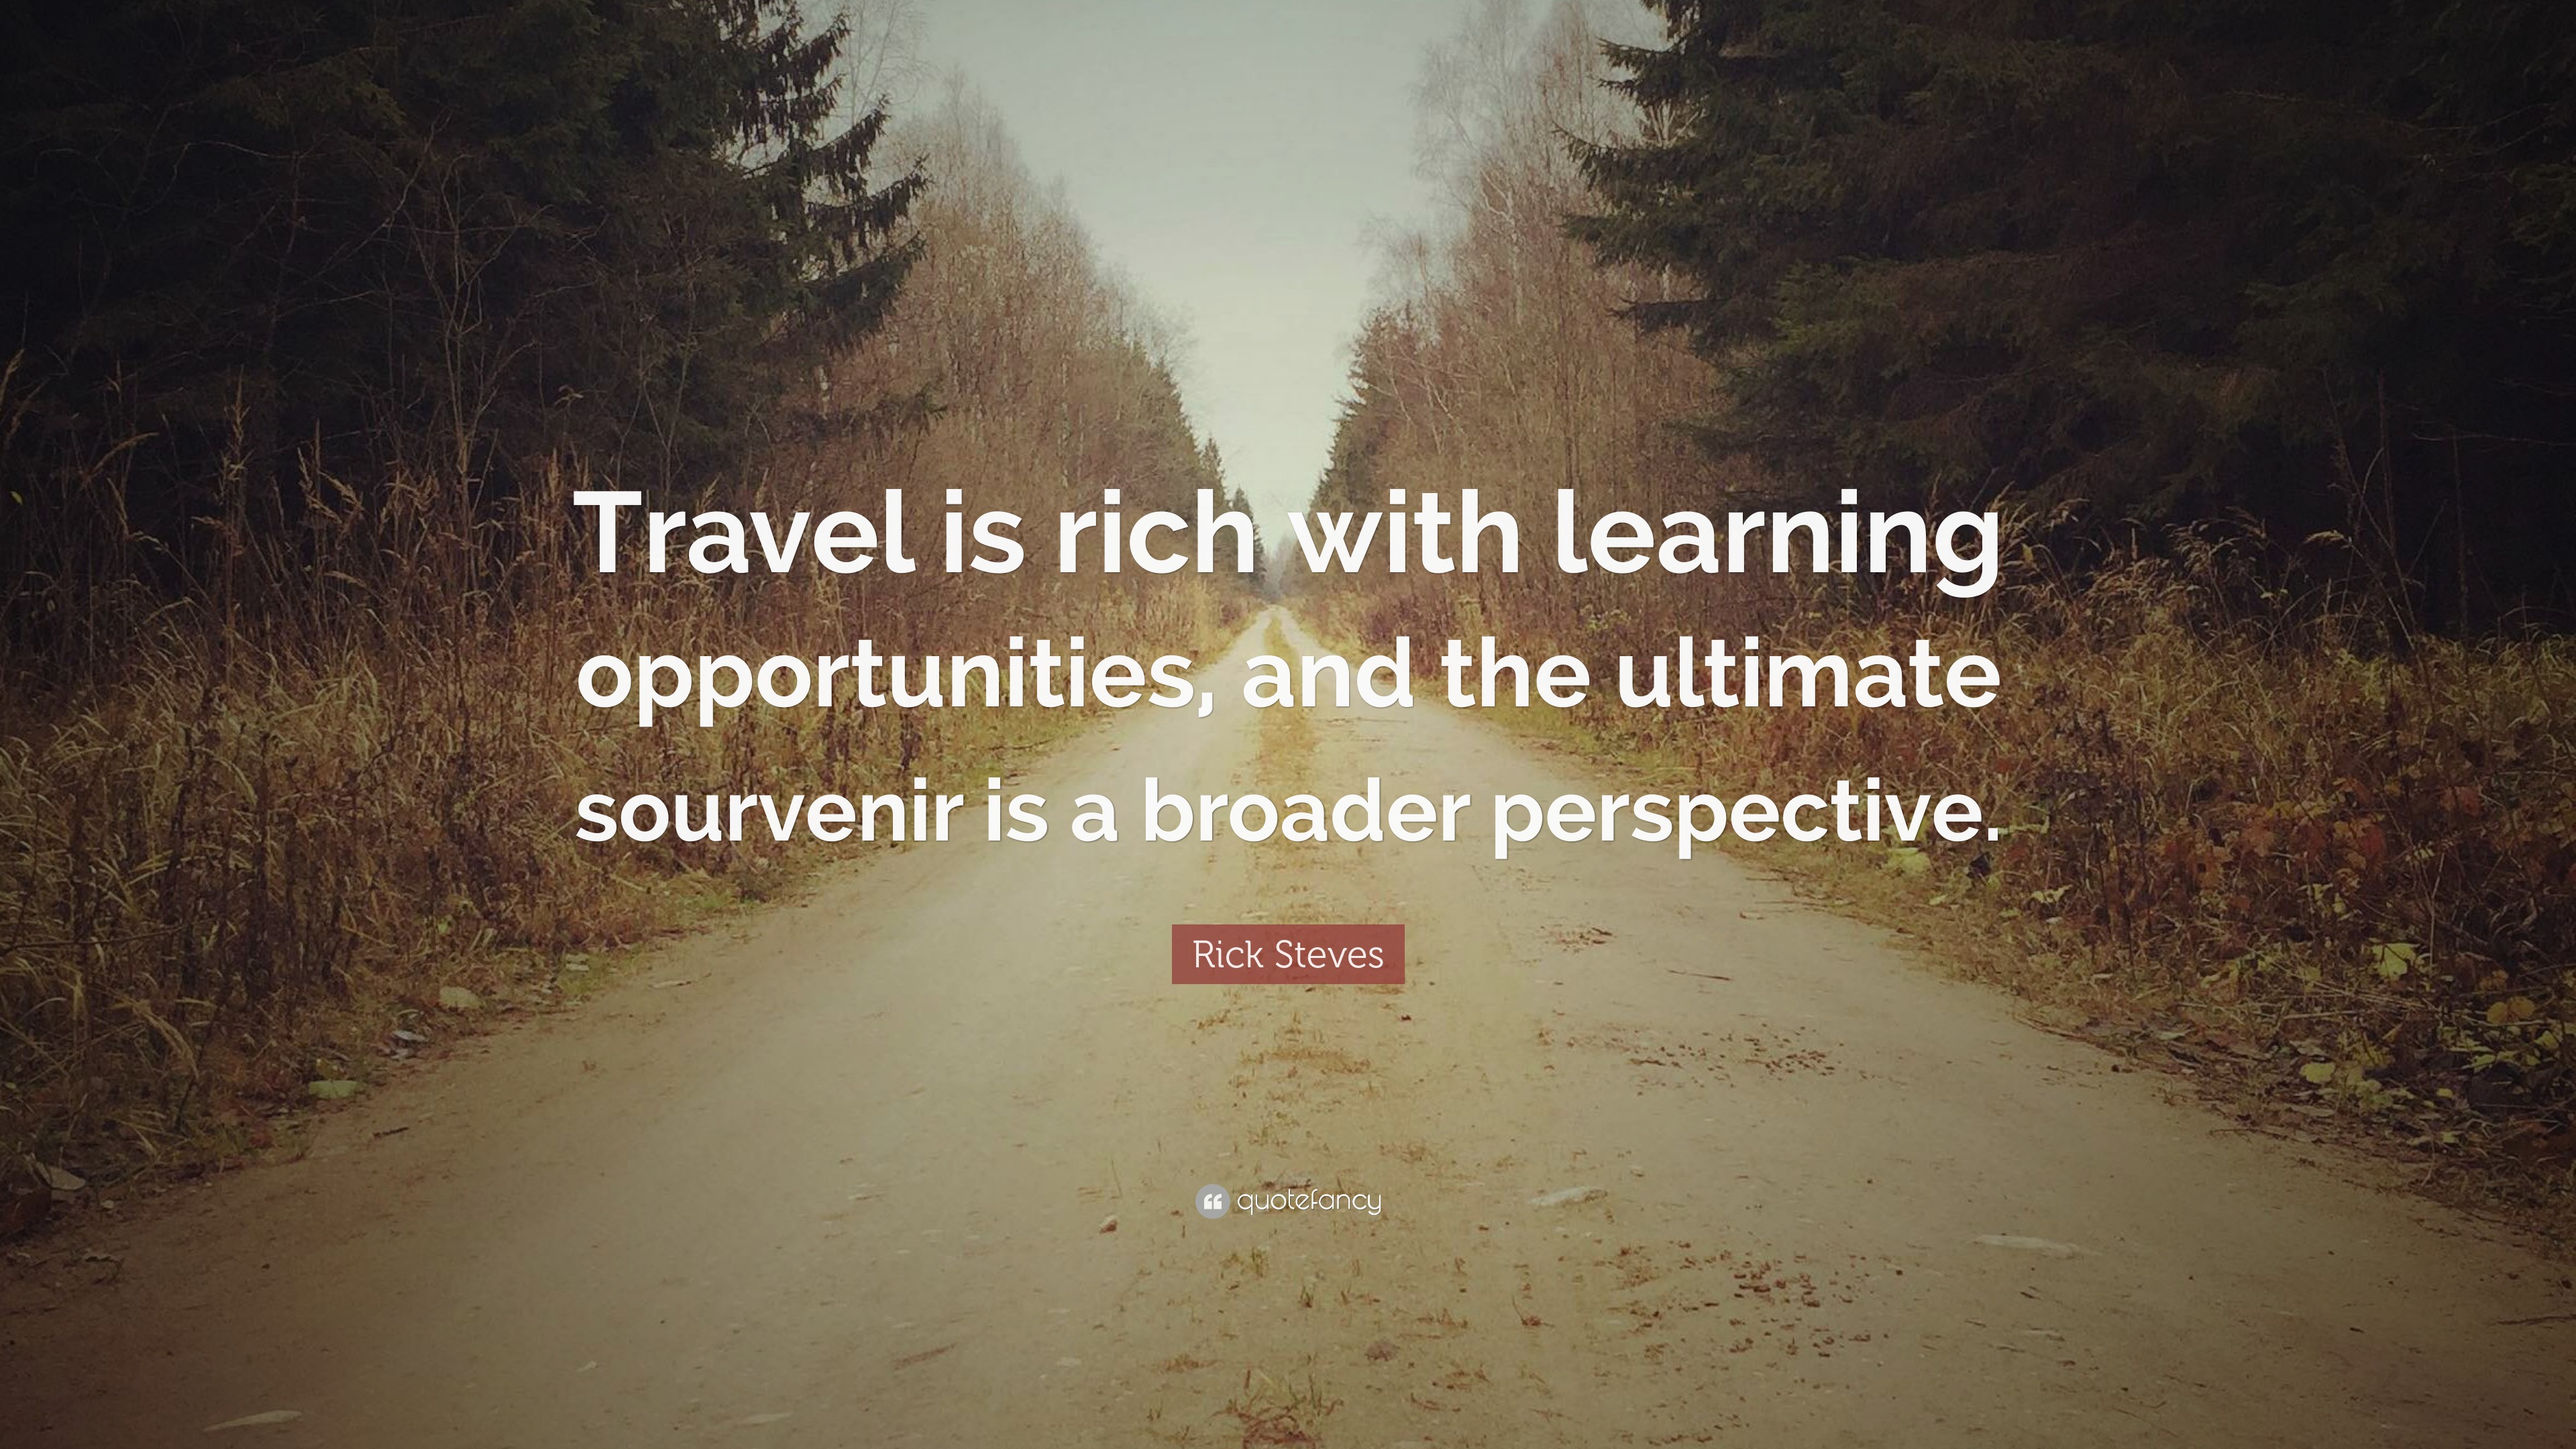 Rick Steves Quote: “Travel is rich with learning opportunities, and the